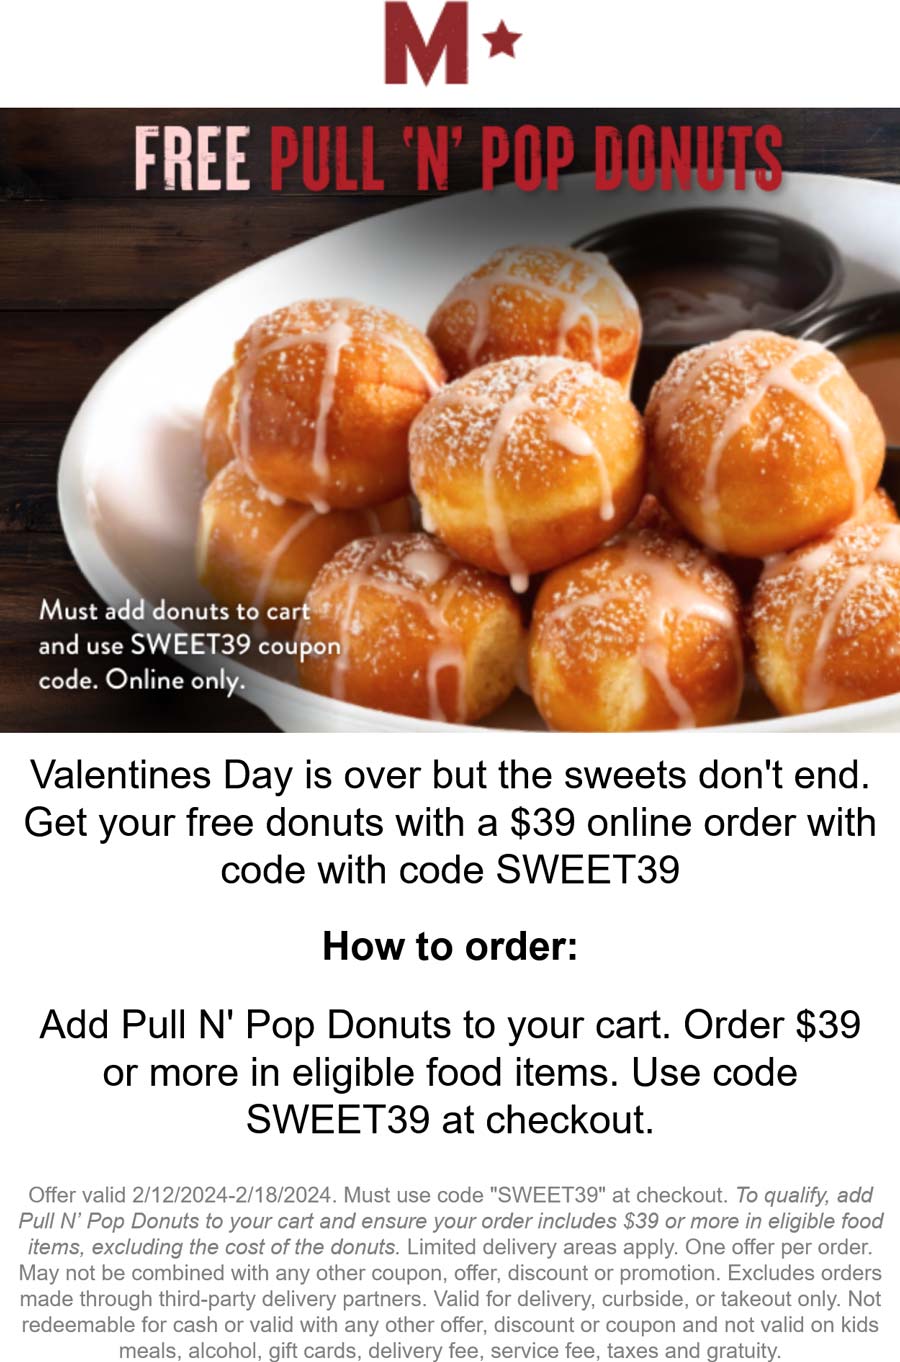 Millers Ale House restaurants Coupon  Free donuts on $39 at Millers Ale House restaurants via promo code SWEET39 #millersalehouse 